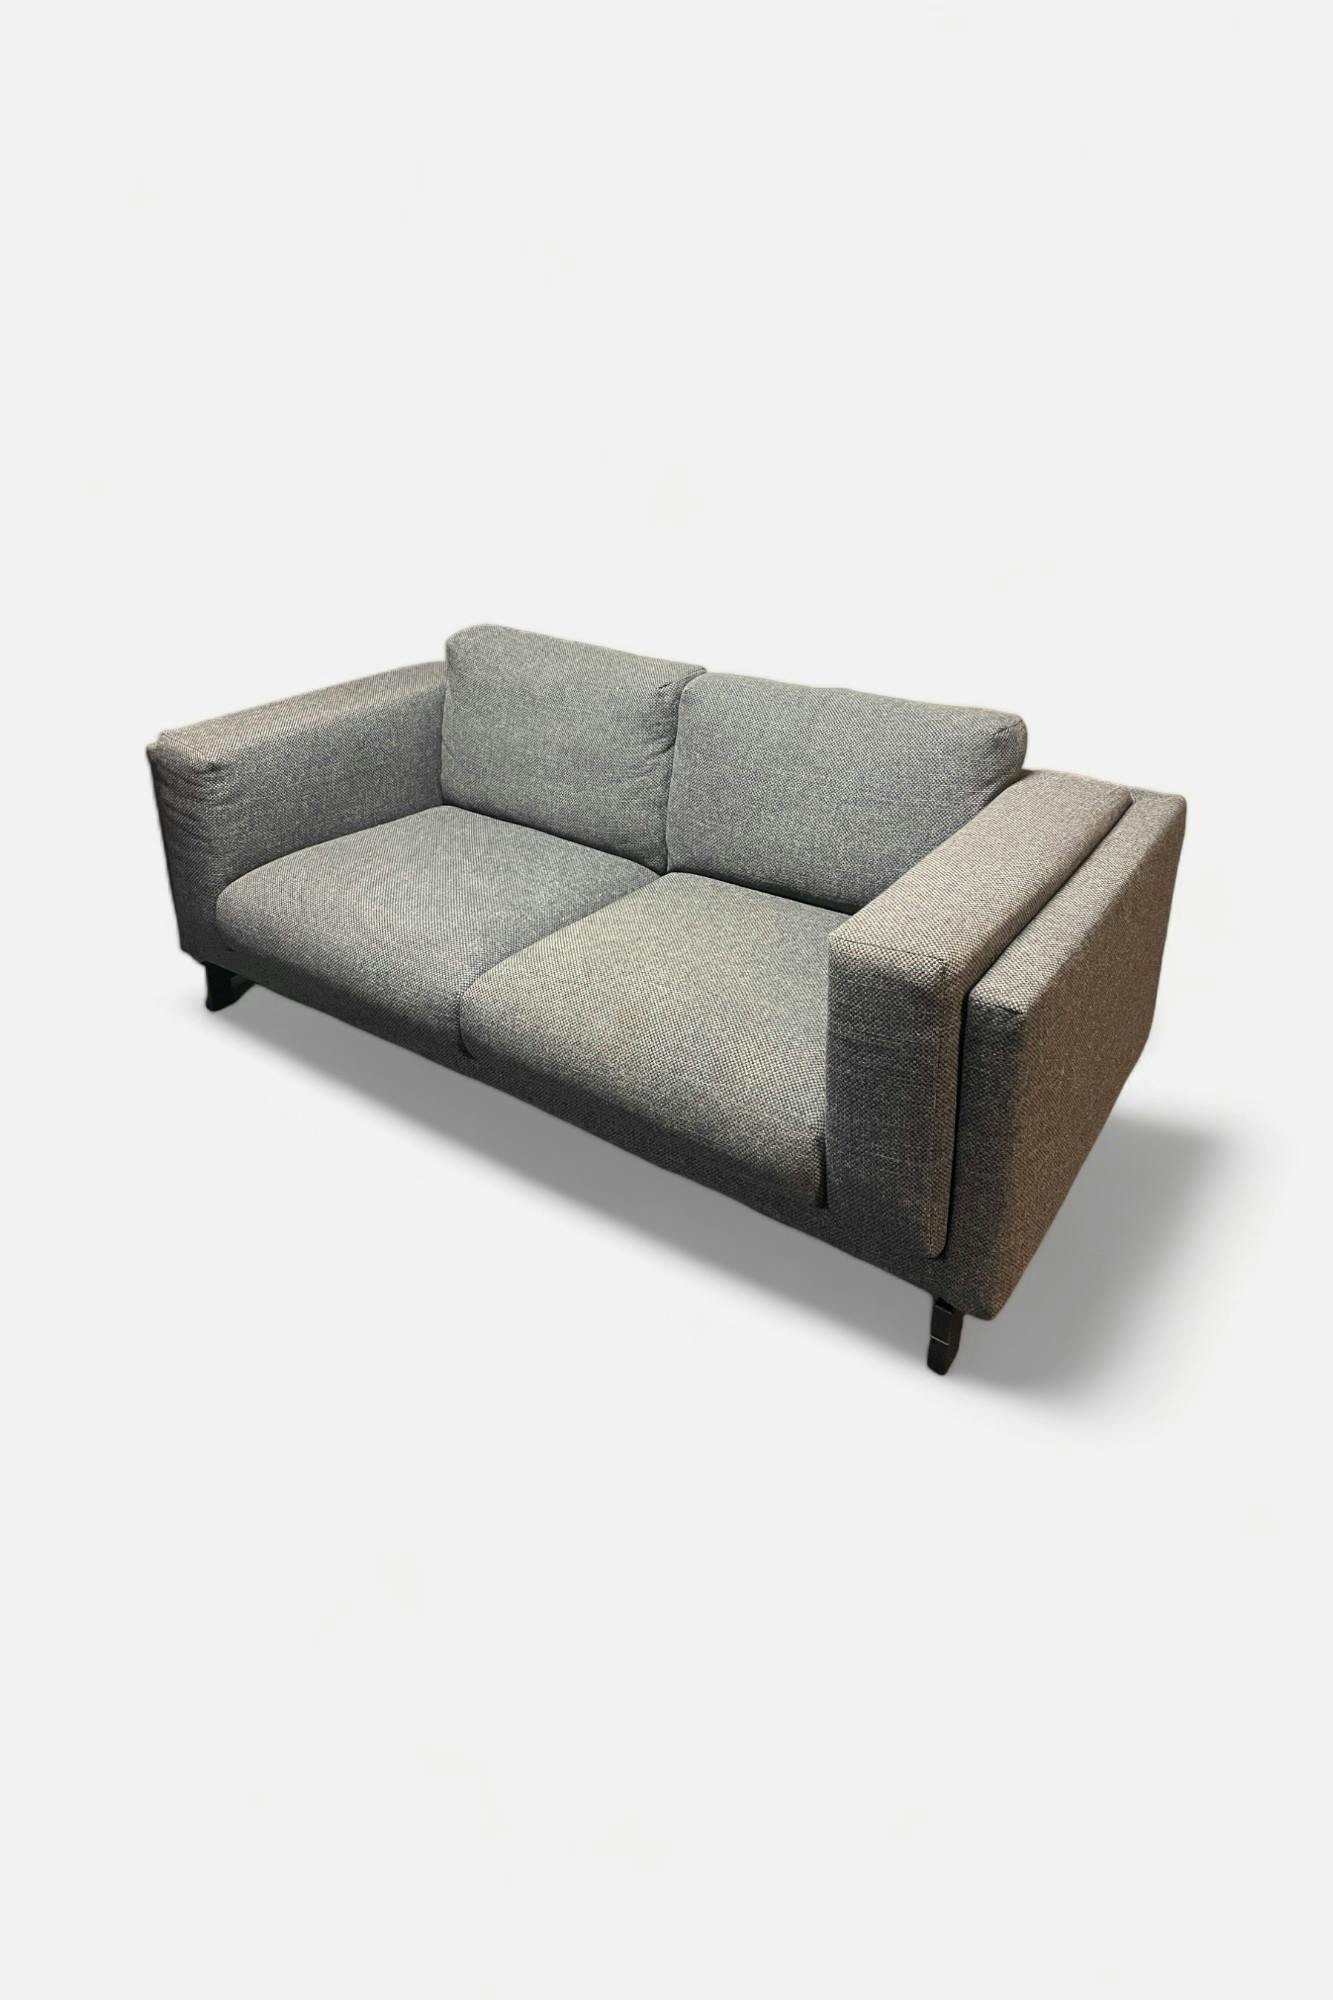 Grey sofa 2 persons - Relieve Furniture